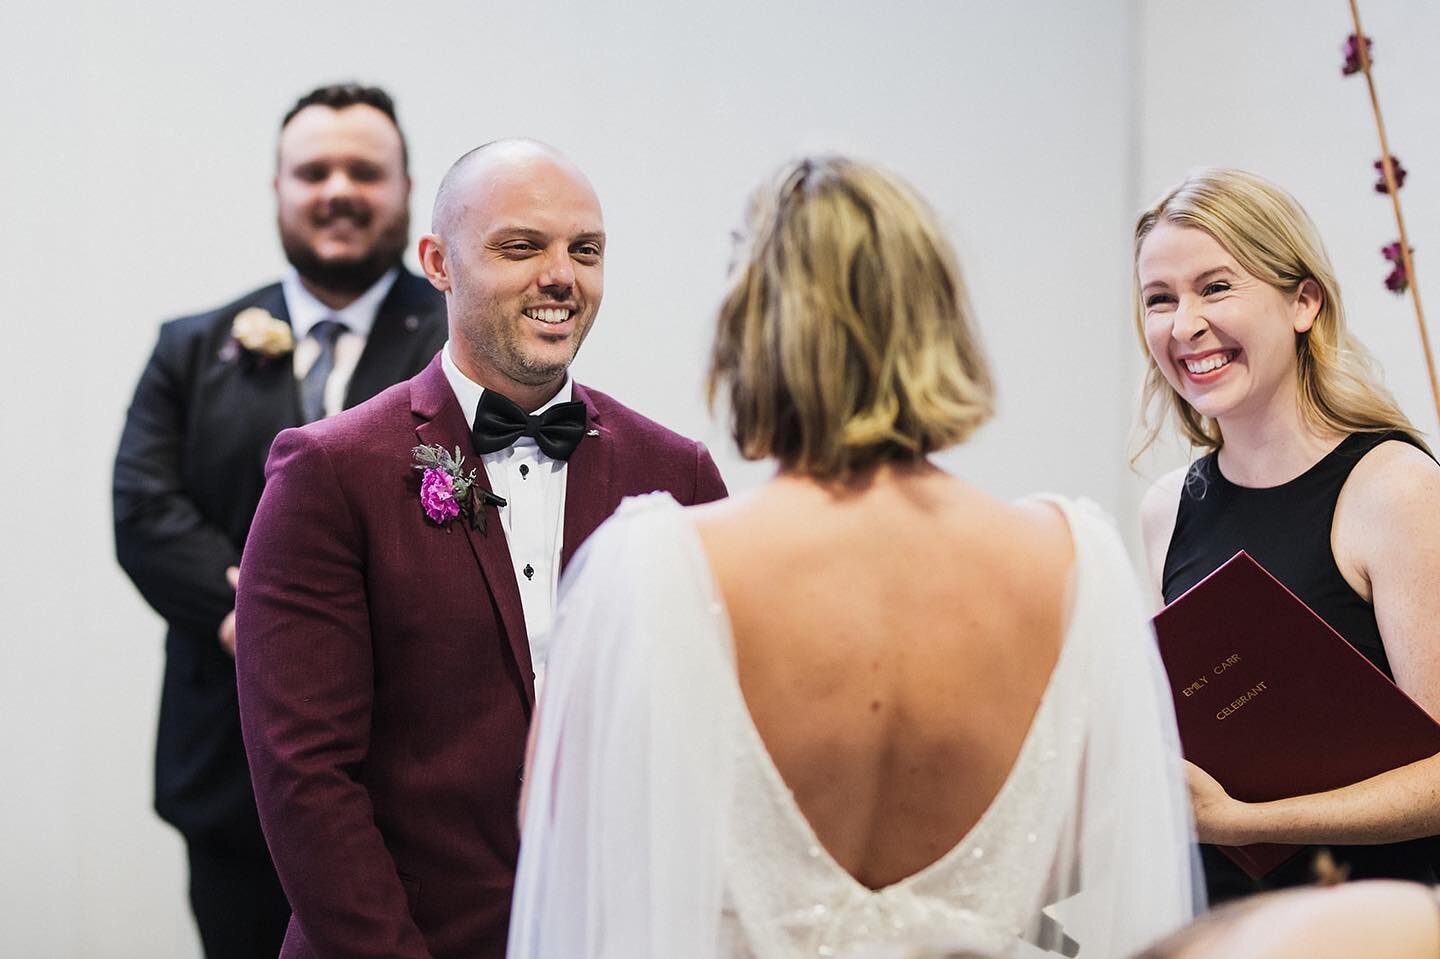 A beautiful couple and their overly excited celebrant.
This wedding was supposed to be on a Saturday. But was moved to Friday (on Friday!) before another lockdown commenced.
So you&rsquo;d be stoked too.

#lockdown #ceremony #love #celebrant #wedding